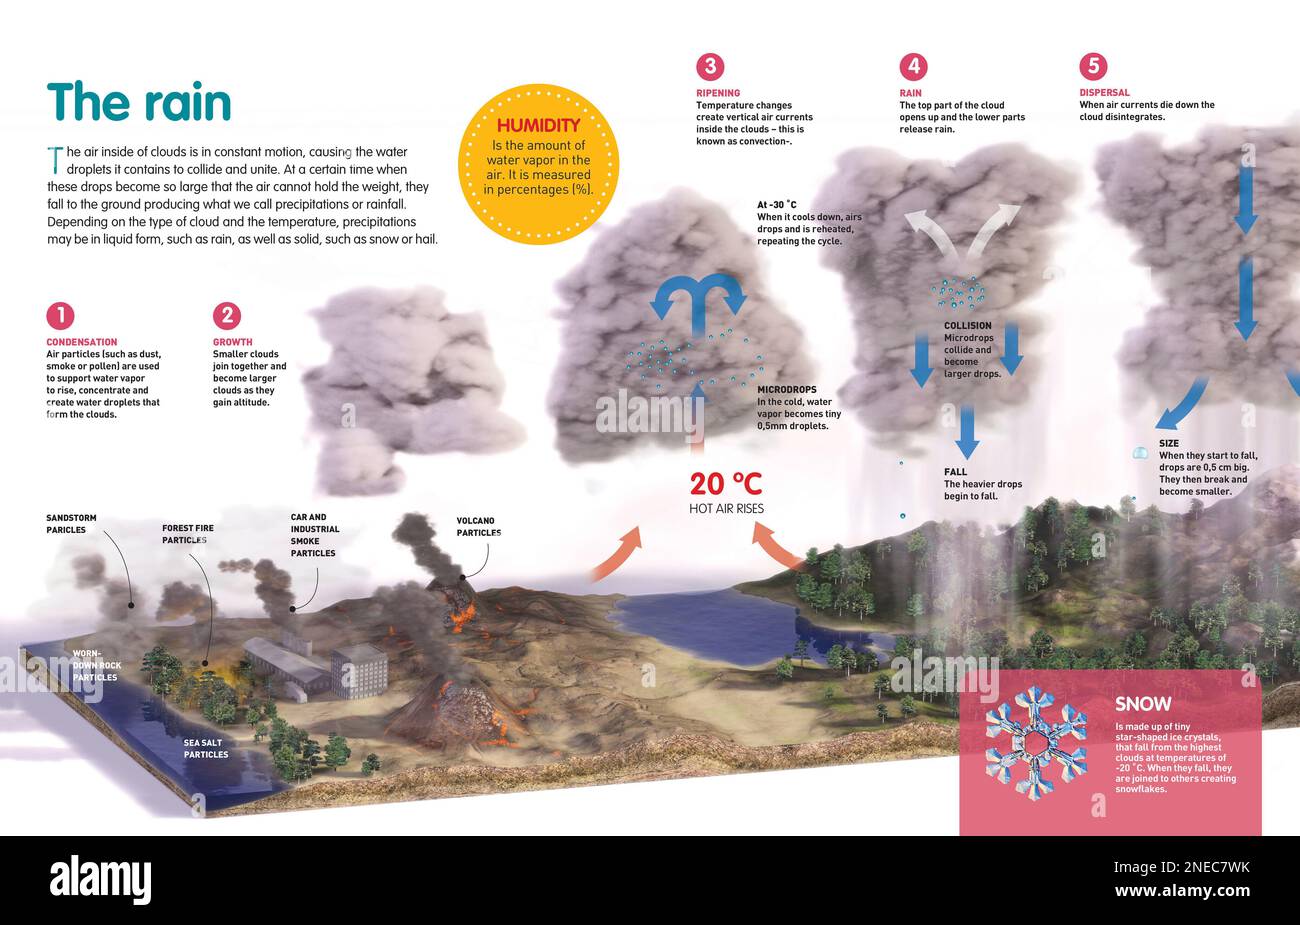 Infographic about the process of formation of rain and hail, and how their precipitation is produced. [QuarkXPress (.qxp); Adobe InDesign (.indd); 4960x3188]. Stock Photo